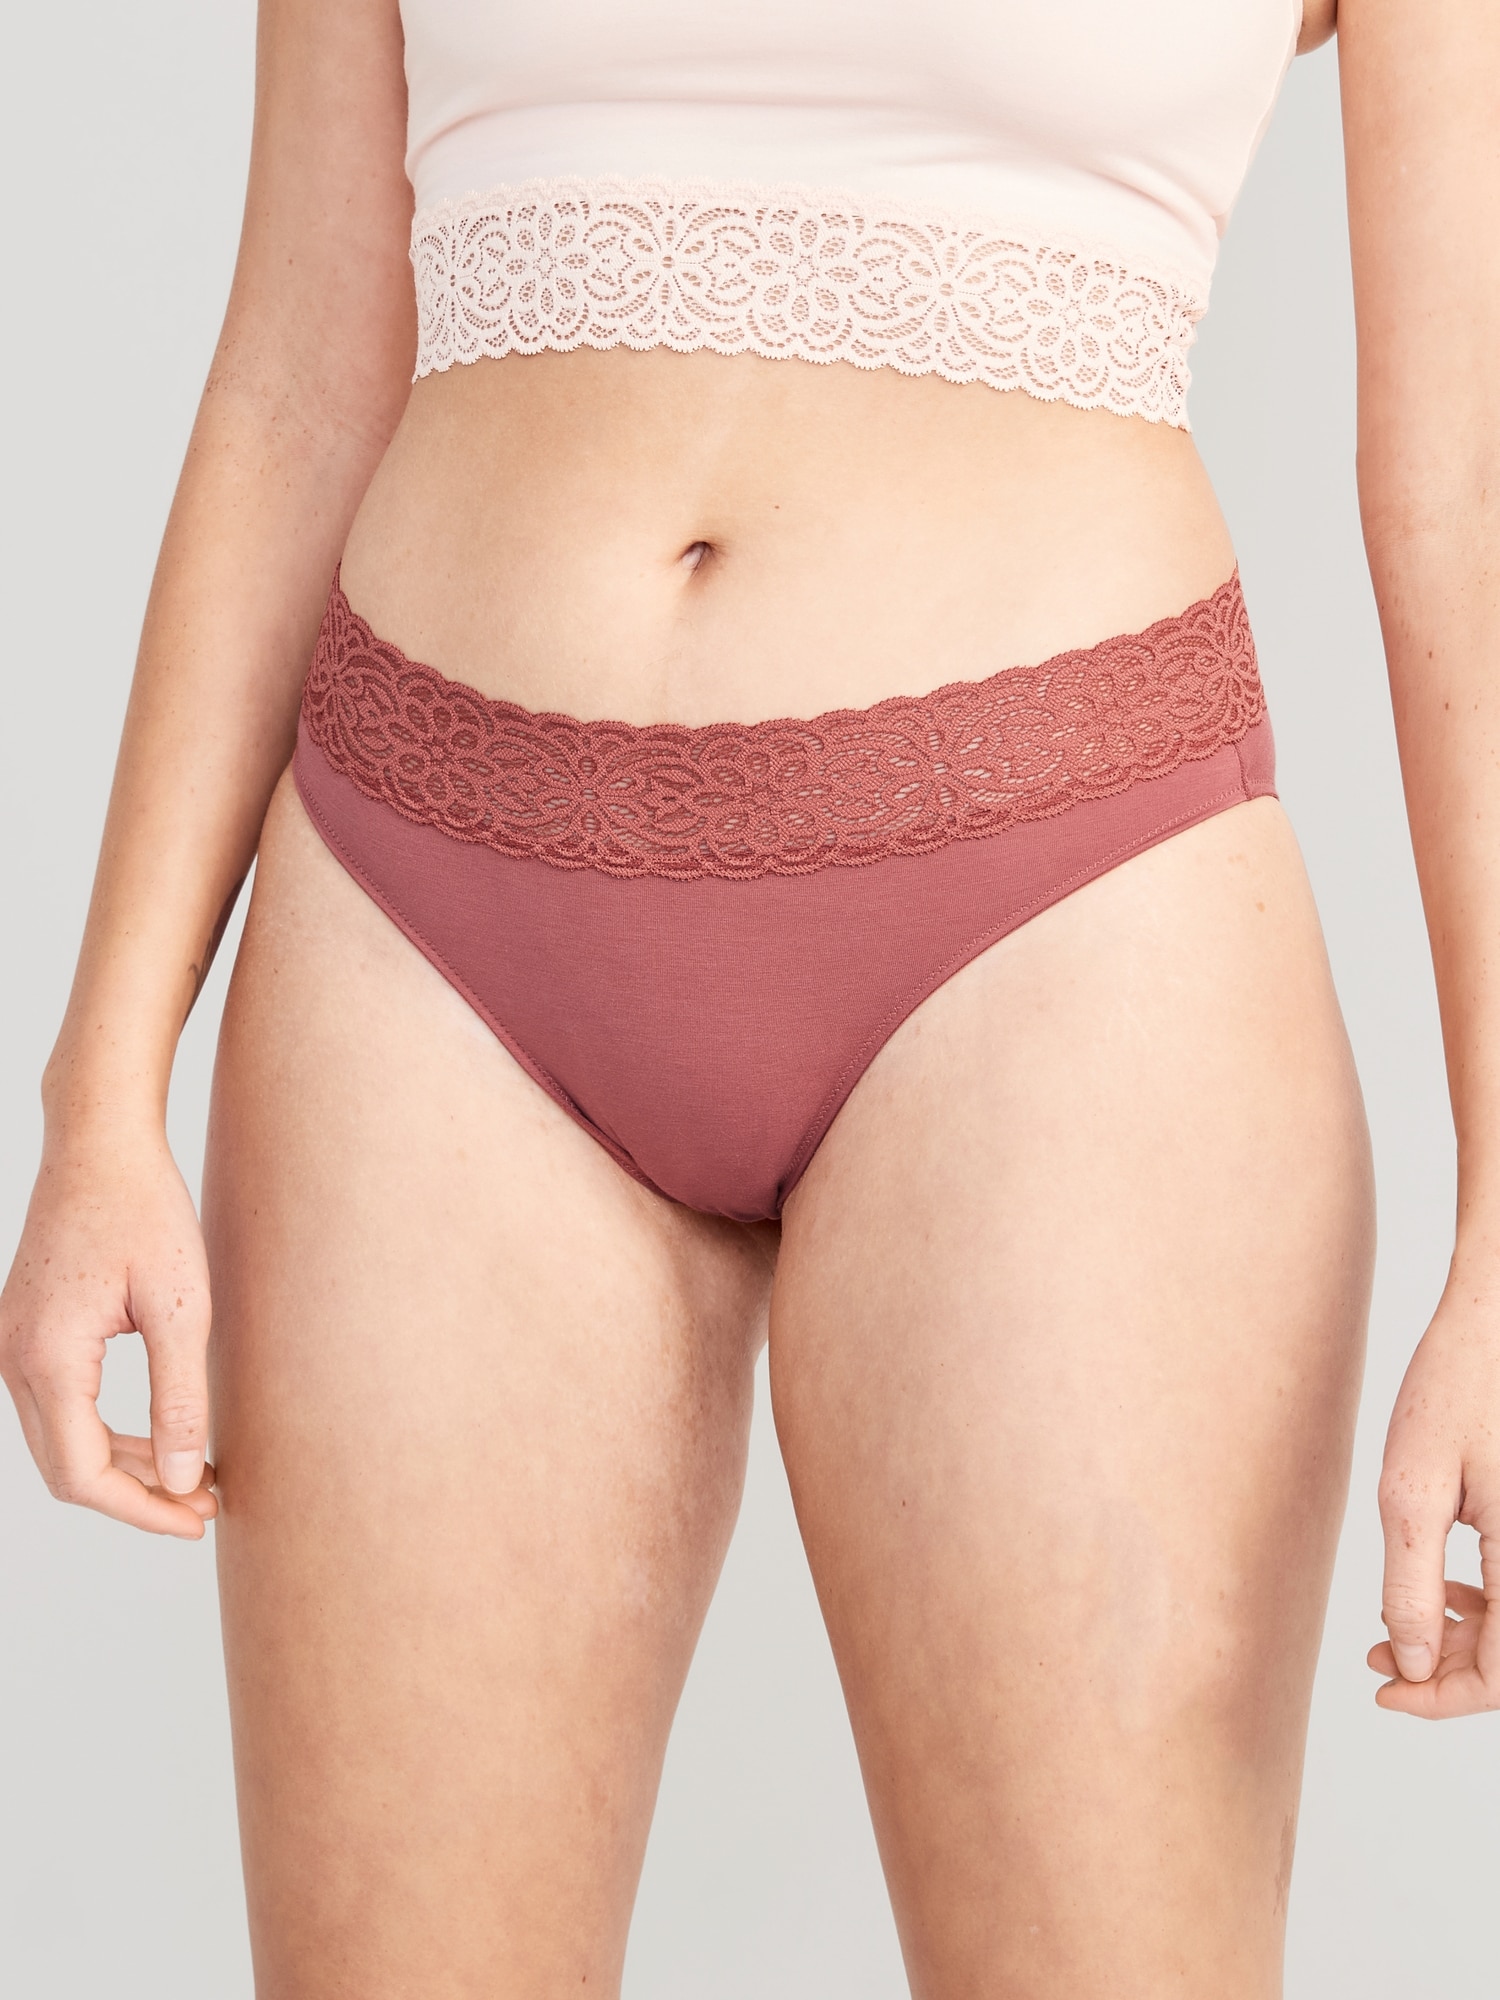 Mid-Rise Lace-Trimmed Bikini Underwear for Women - Old Navy Philippines